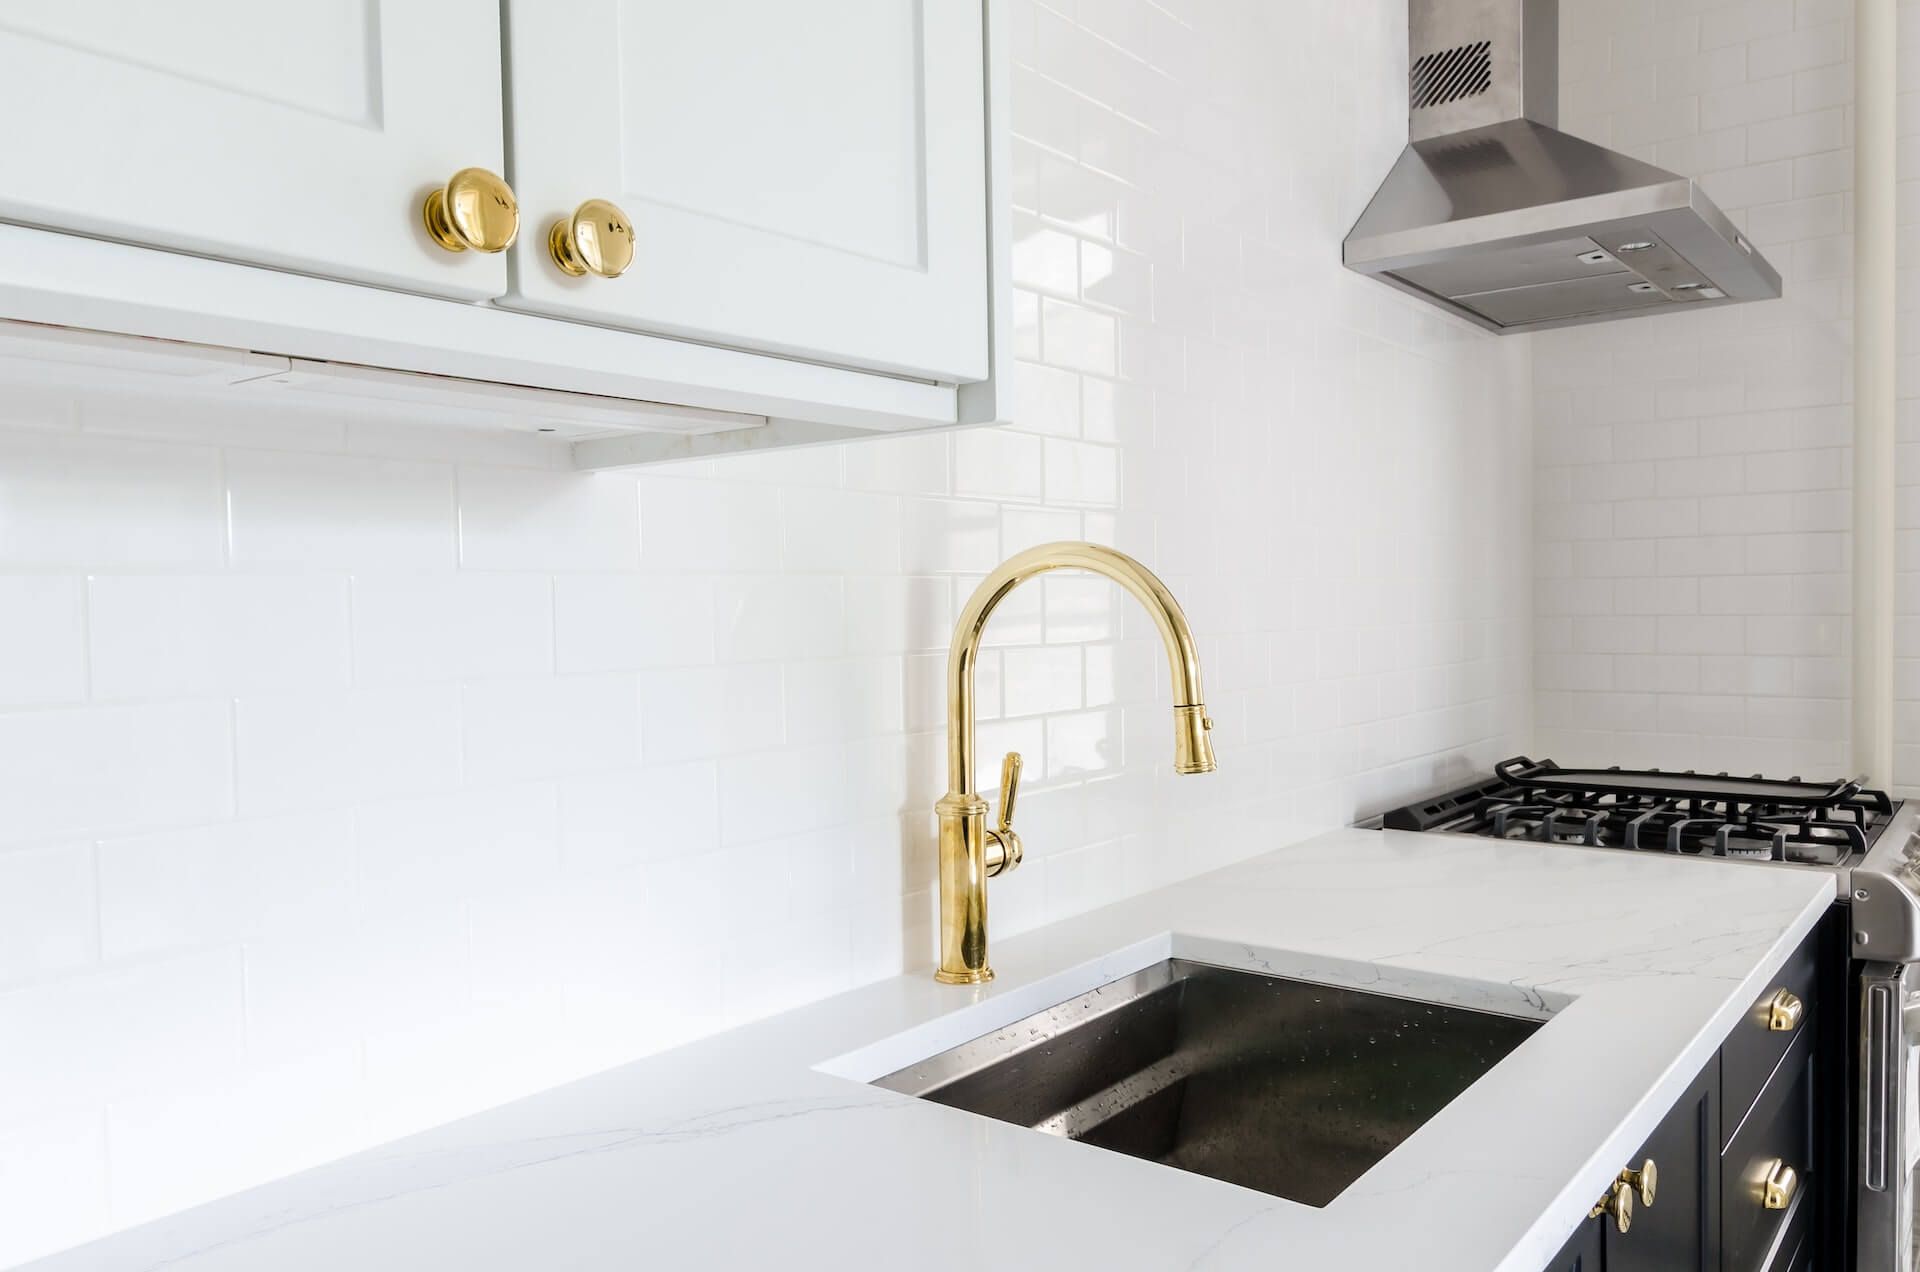 Should your kitchen faucets' material match your other hardware?